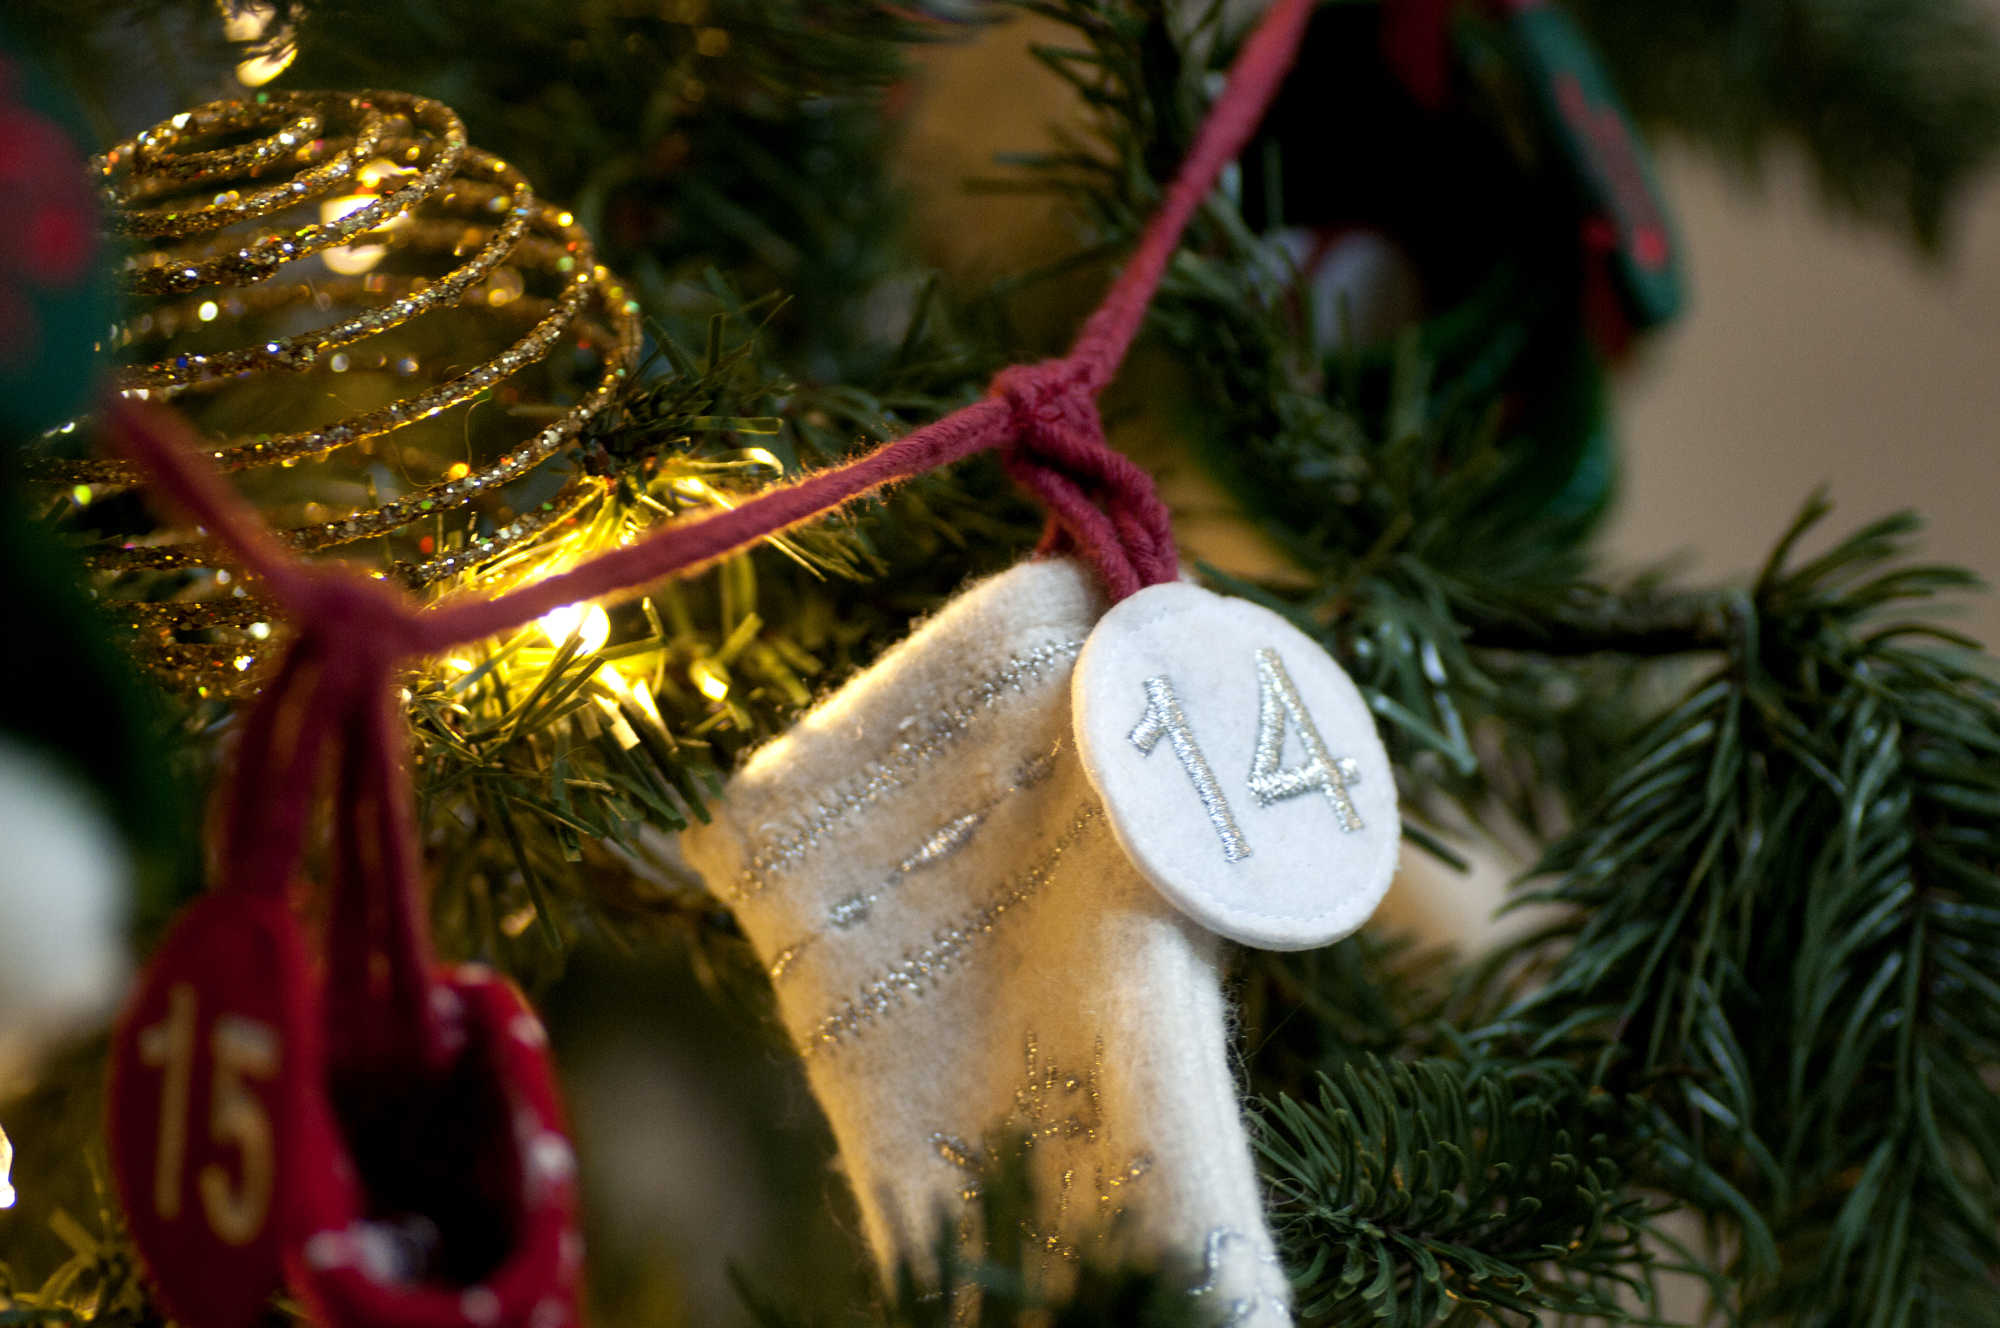 The Drass family encourages their children to think of others with suggestions on giving, tucked inside strands of garland on their tree.